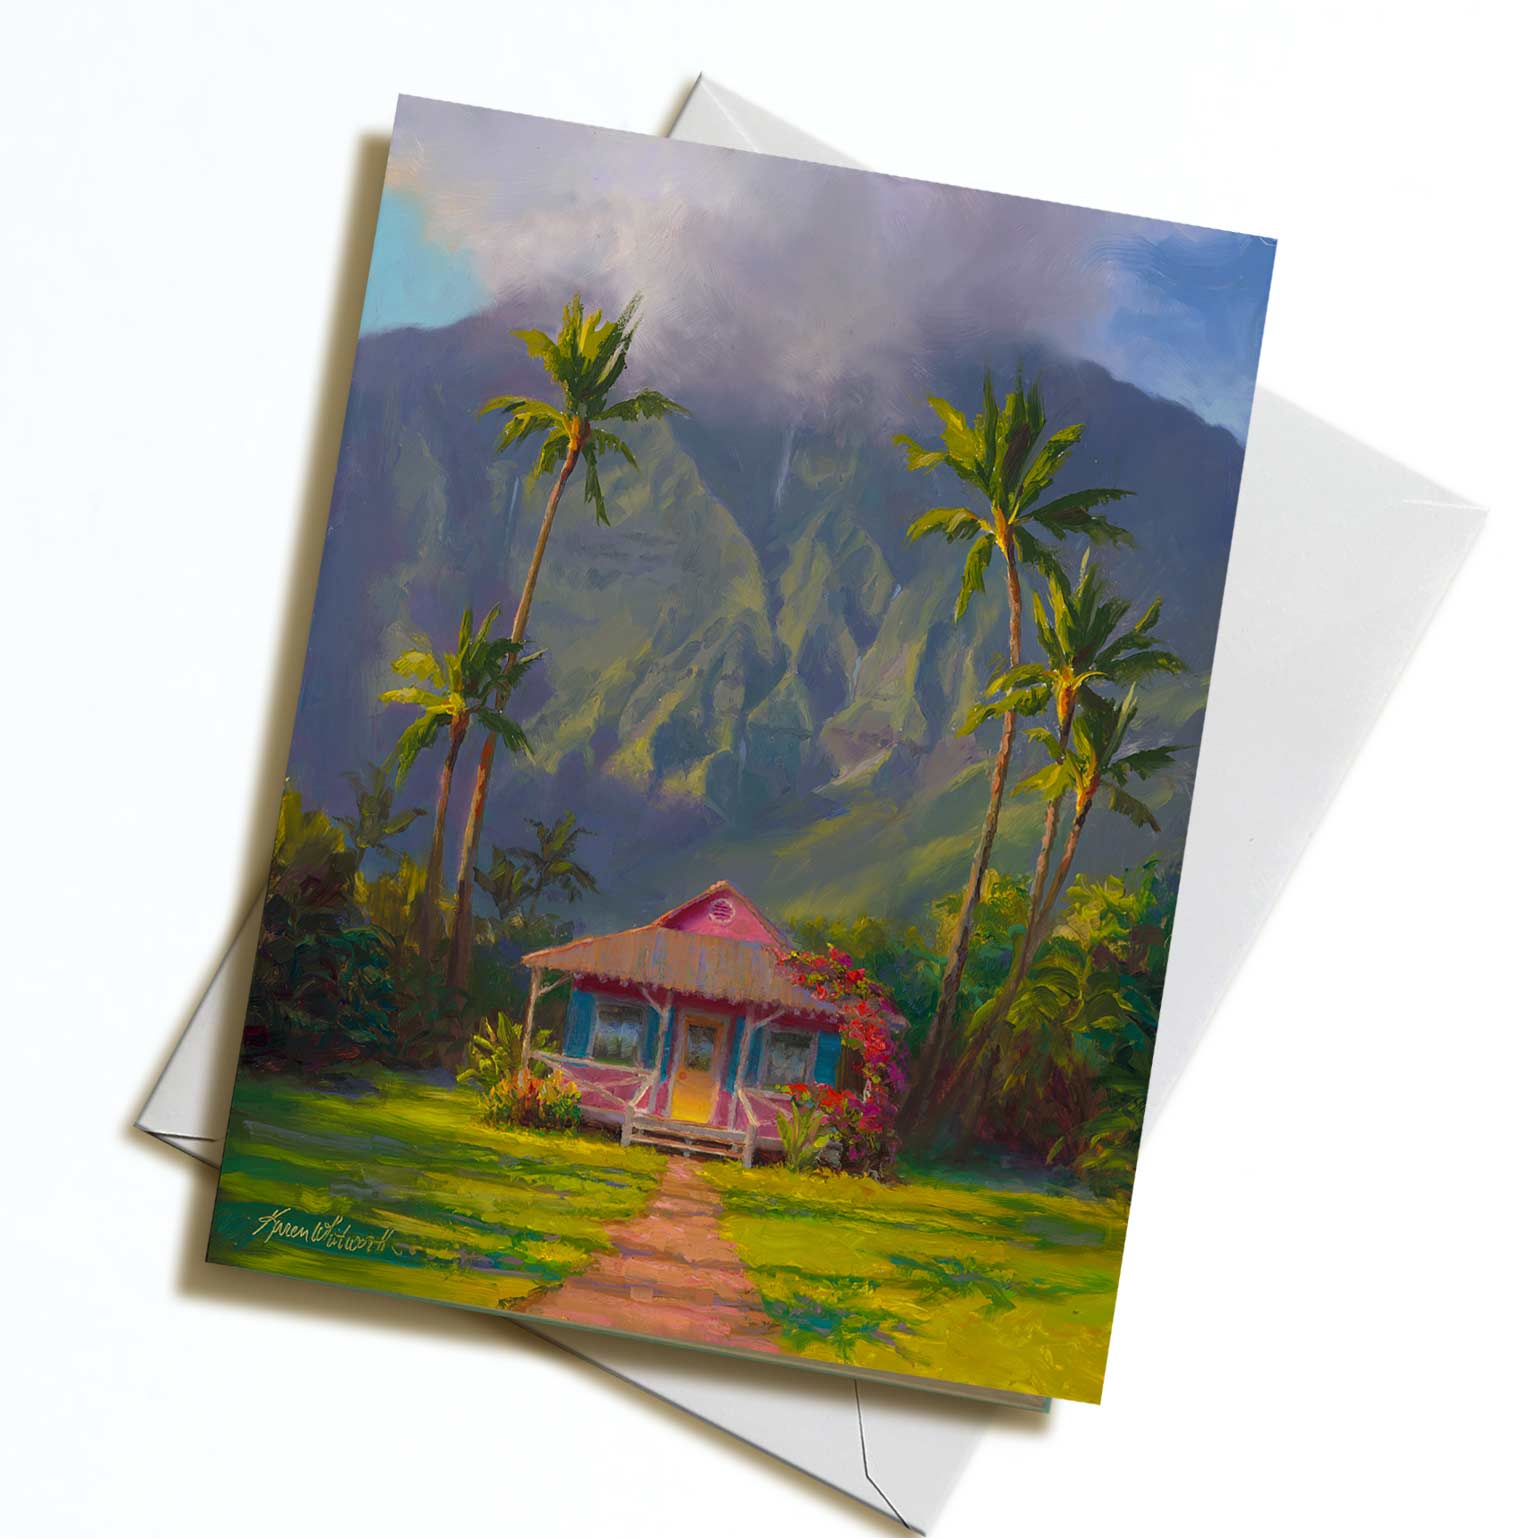 Wholesale Hawaii gift products and greeting cards